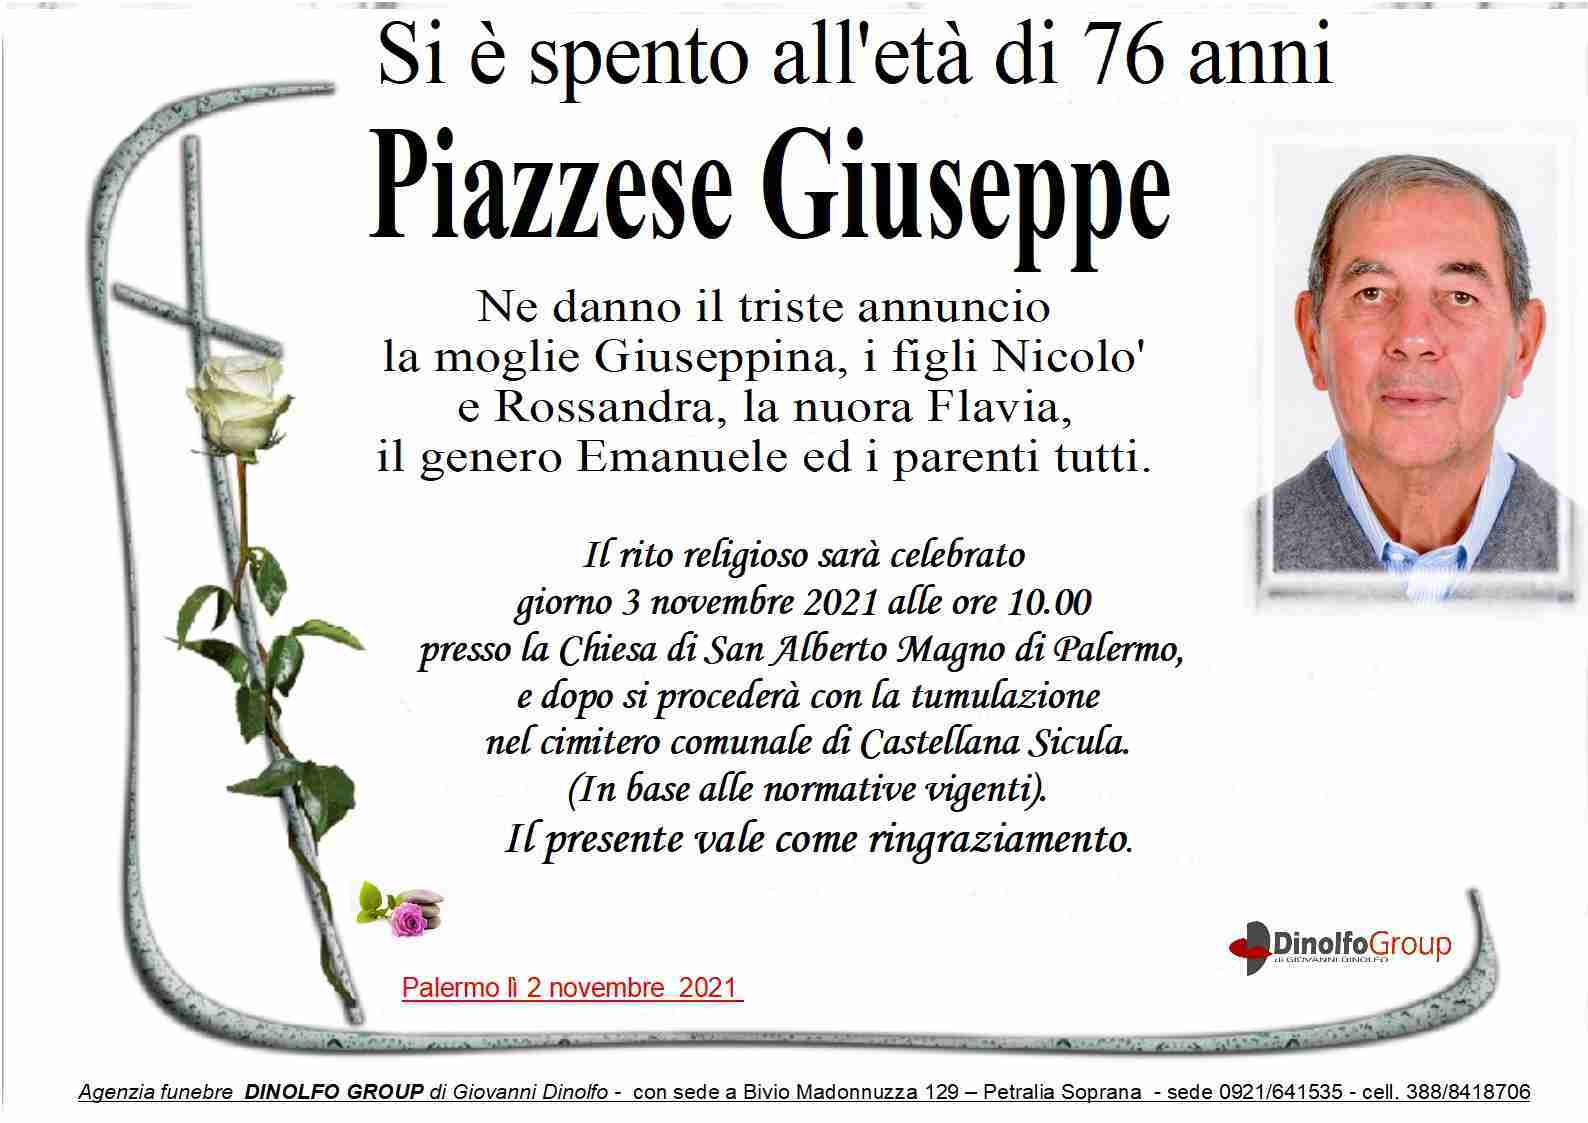 Giuseppe Piazzese